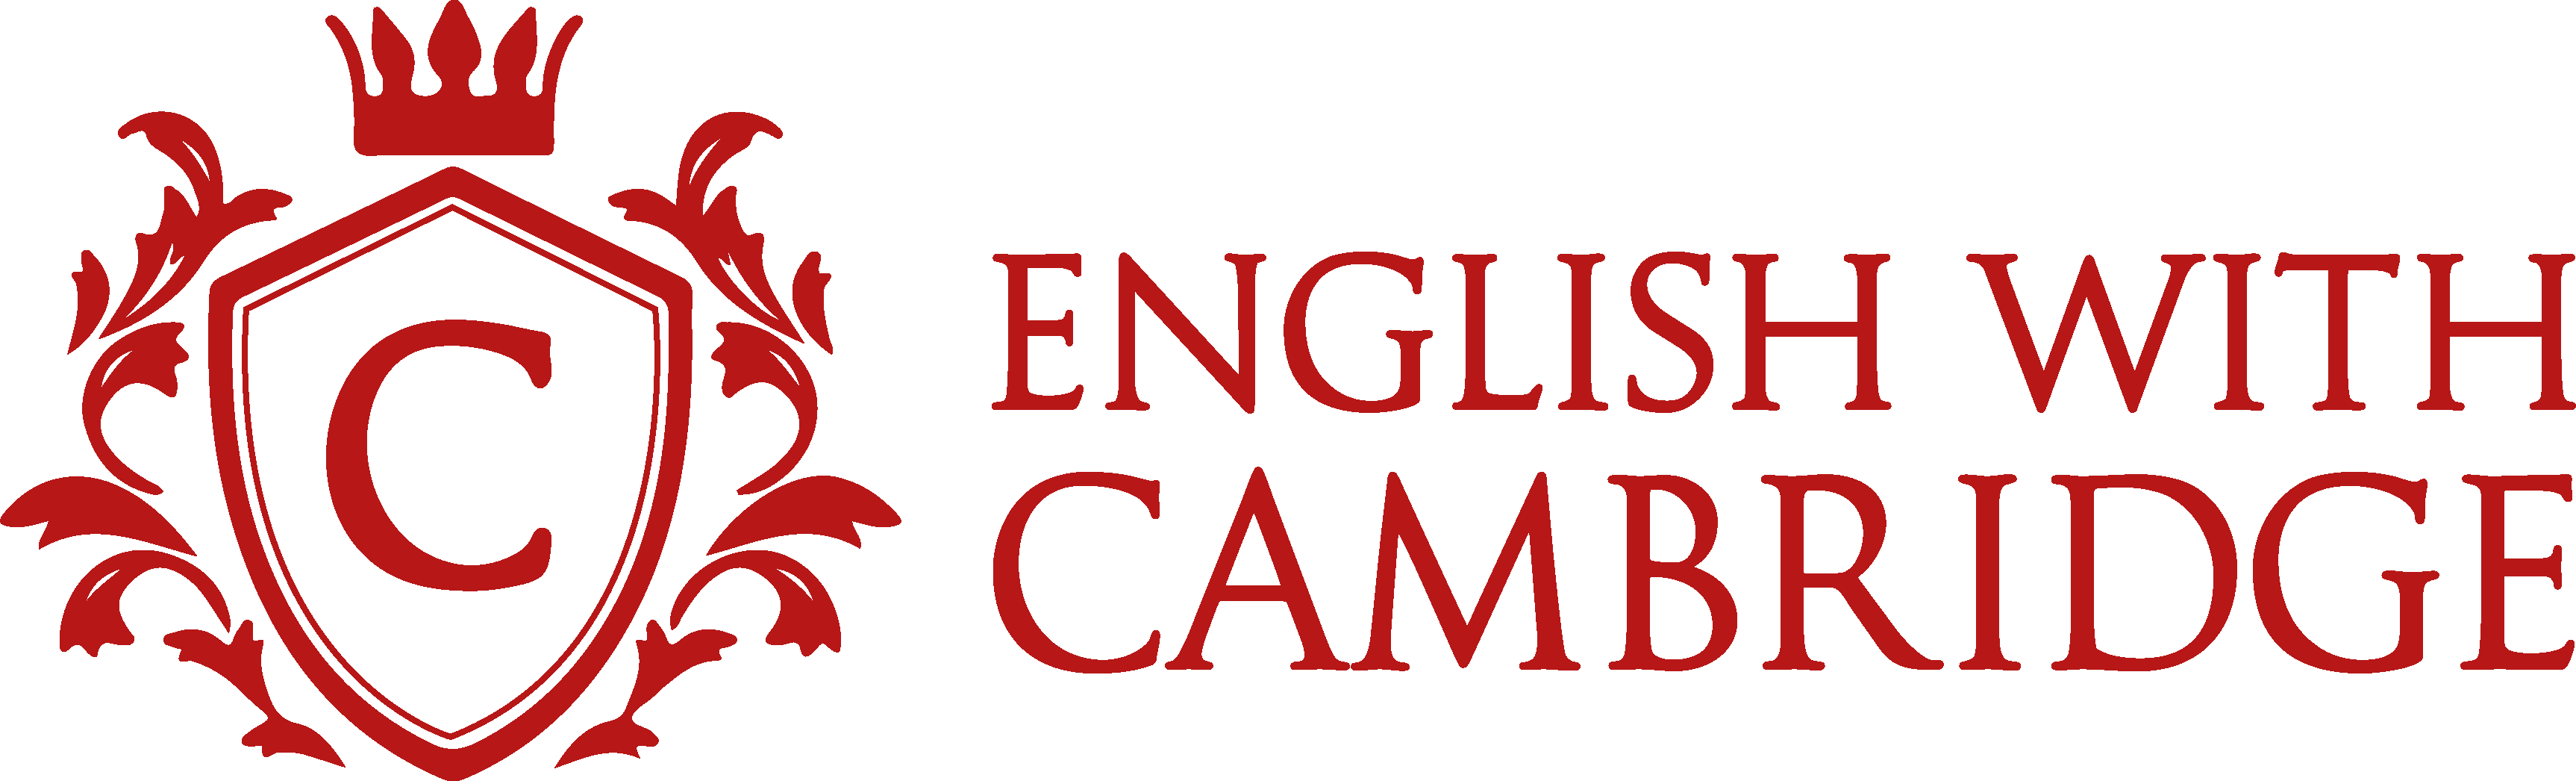 English With Cambridge Coupons